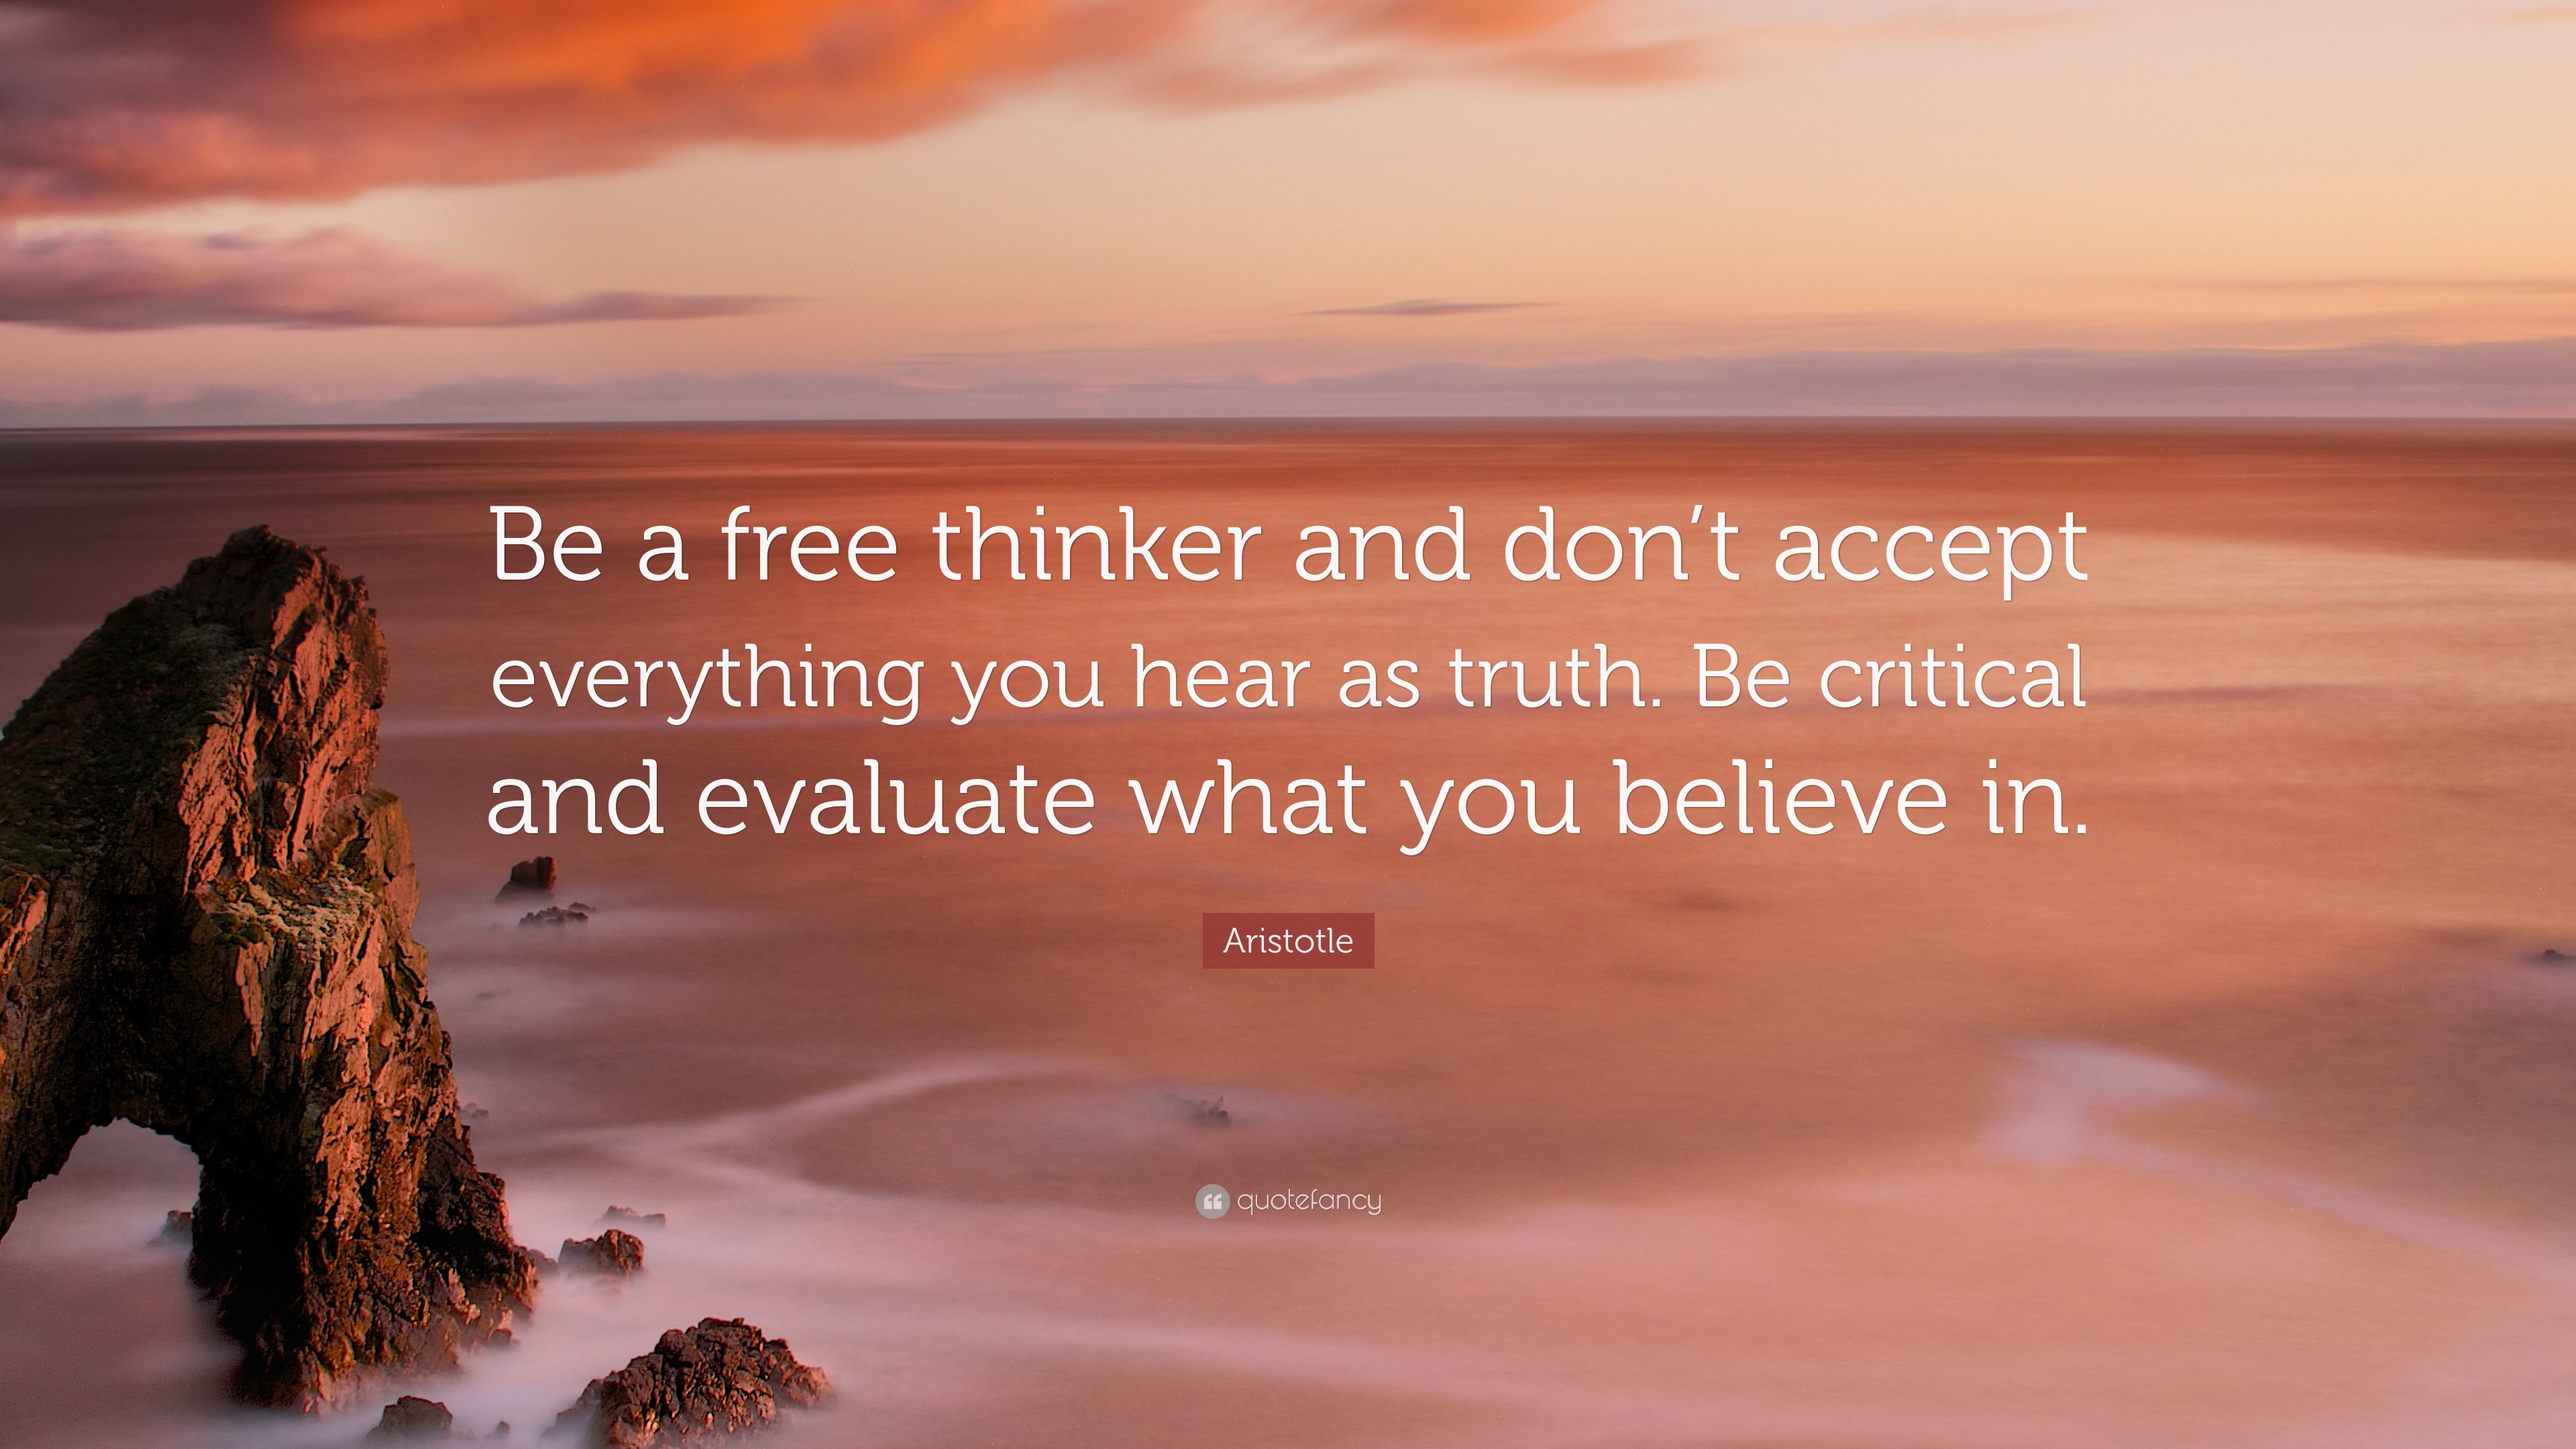 Aristotle Quote: "Be a free thinker and don't accept ...